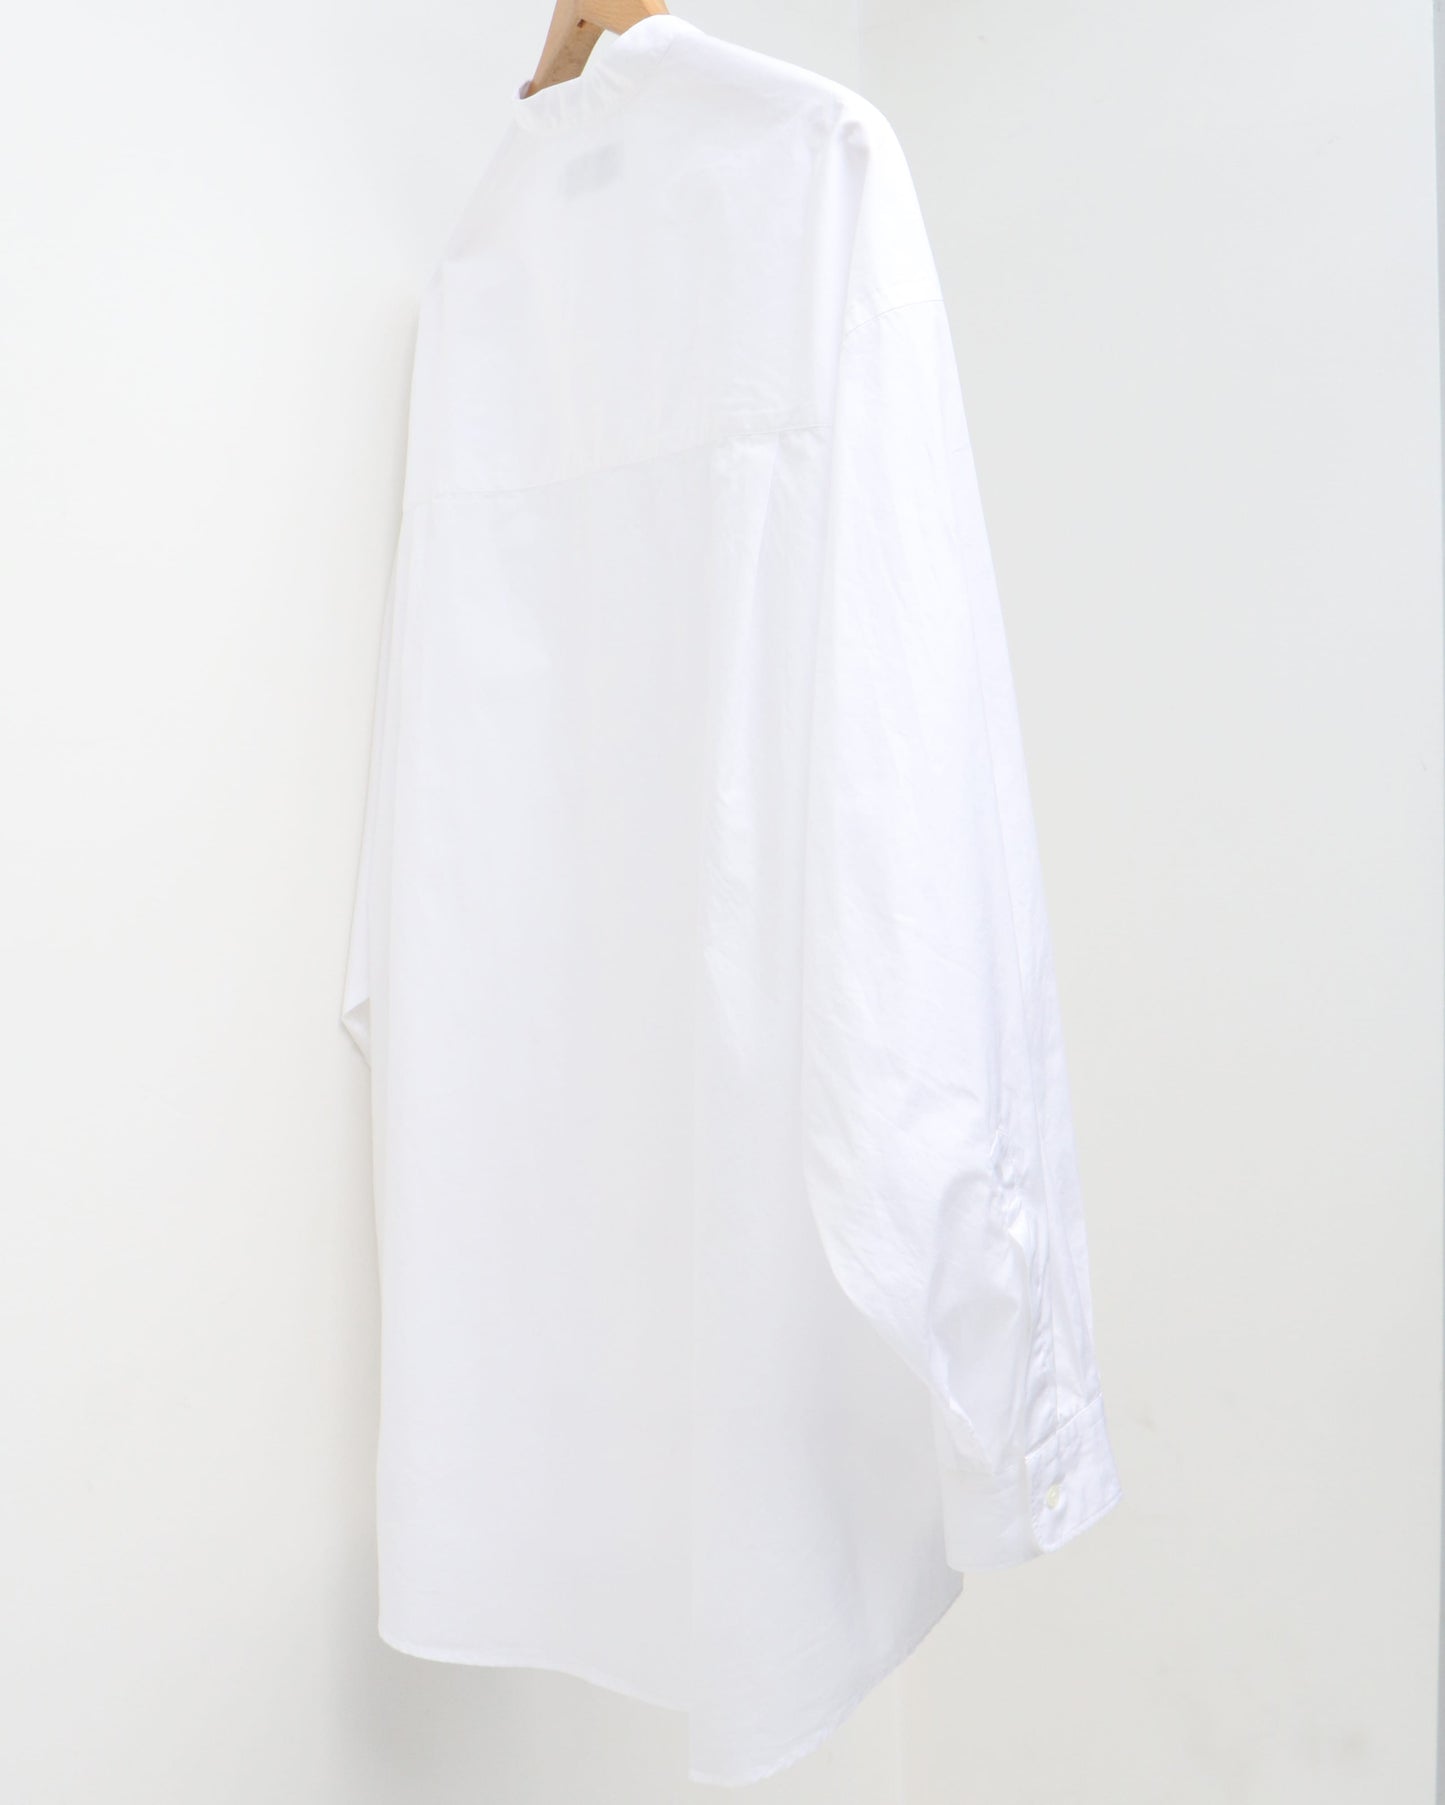 Broad L/S Oversized Band Collar Shirt WHITE